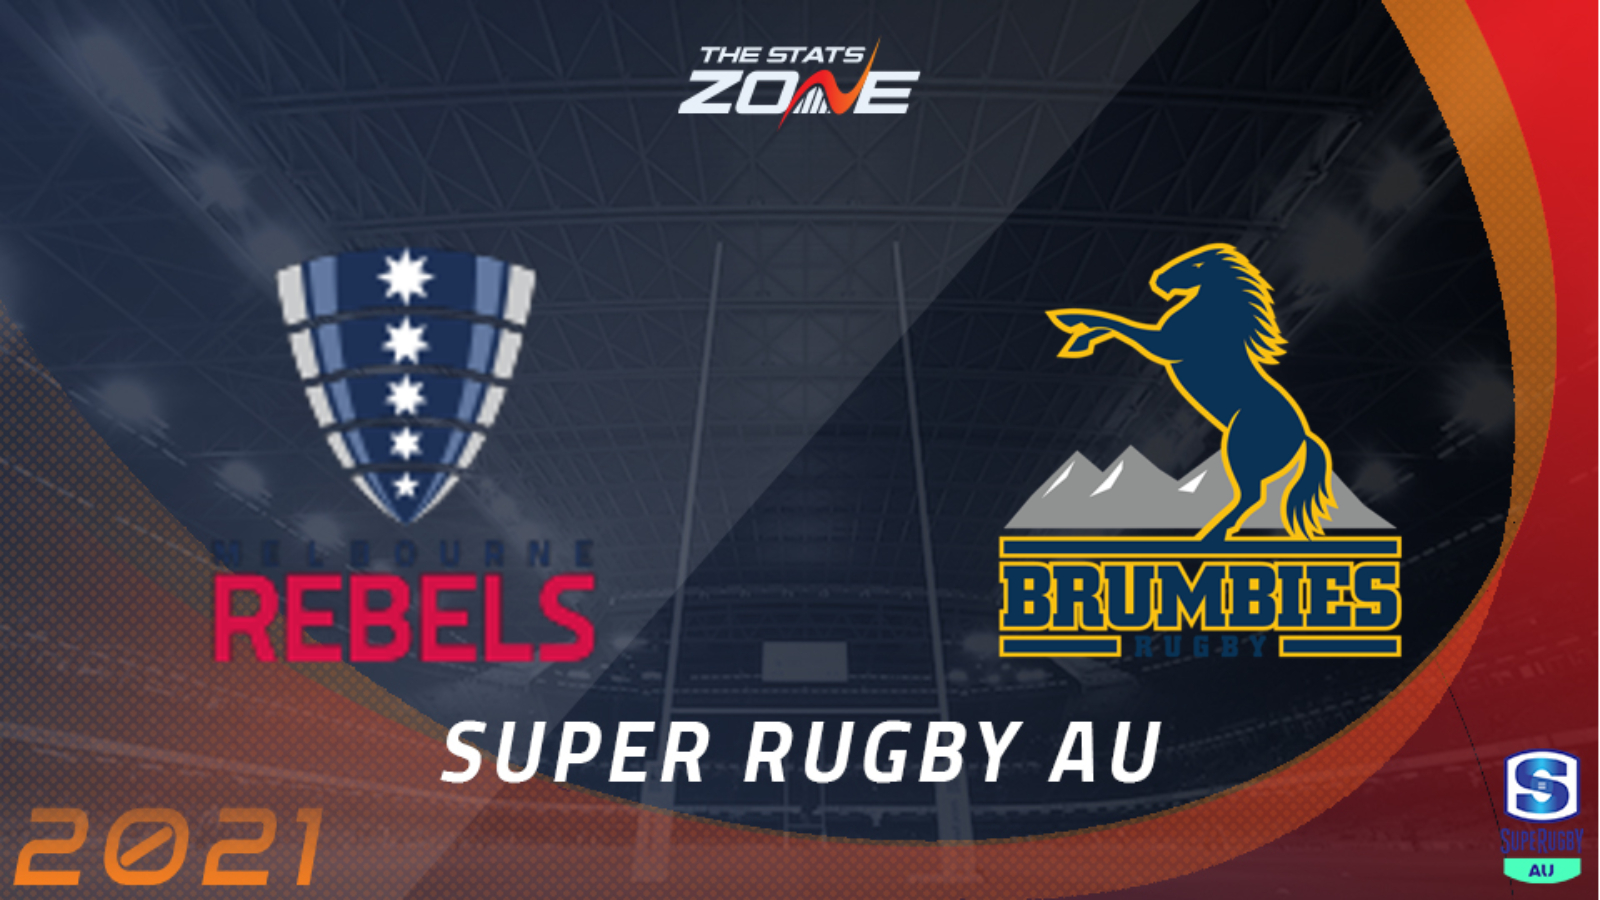 Super Rugby Australia 2021 Logo - Q6tk 7wbea7rzm / We're just having a